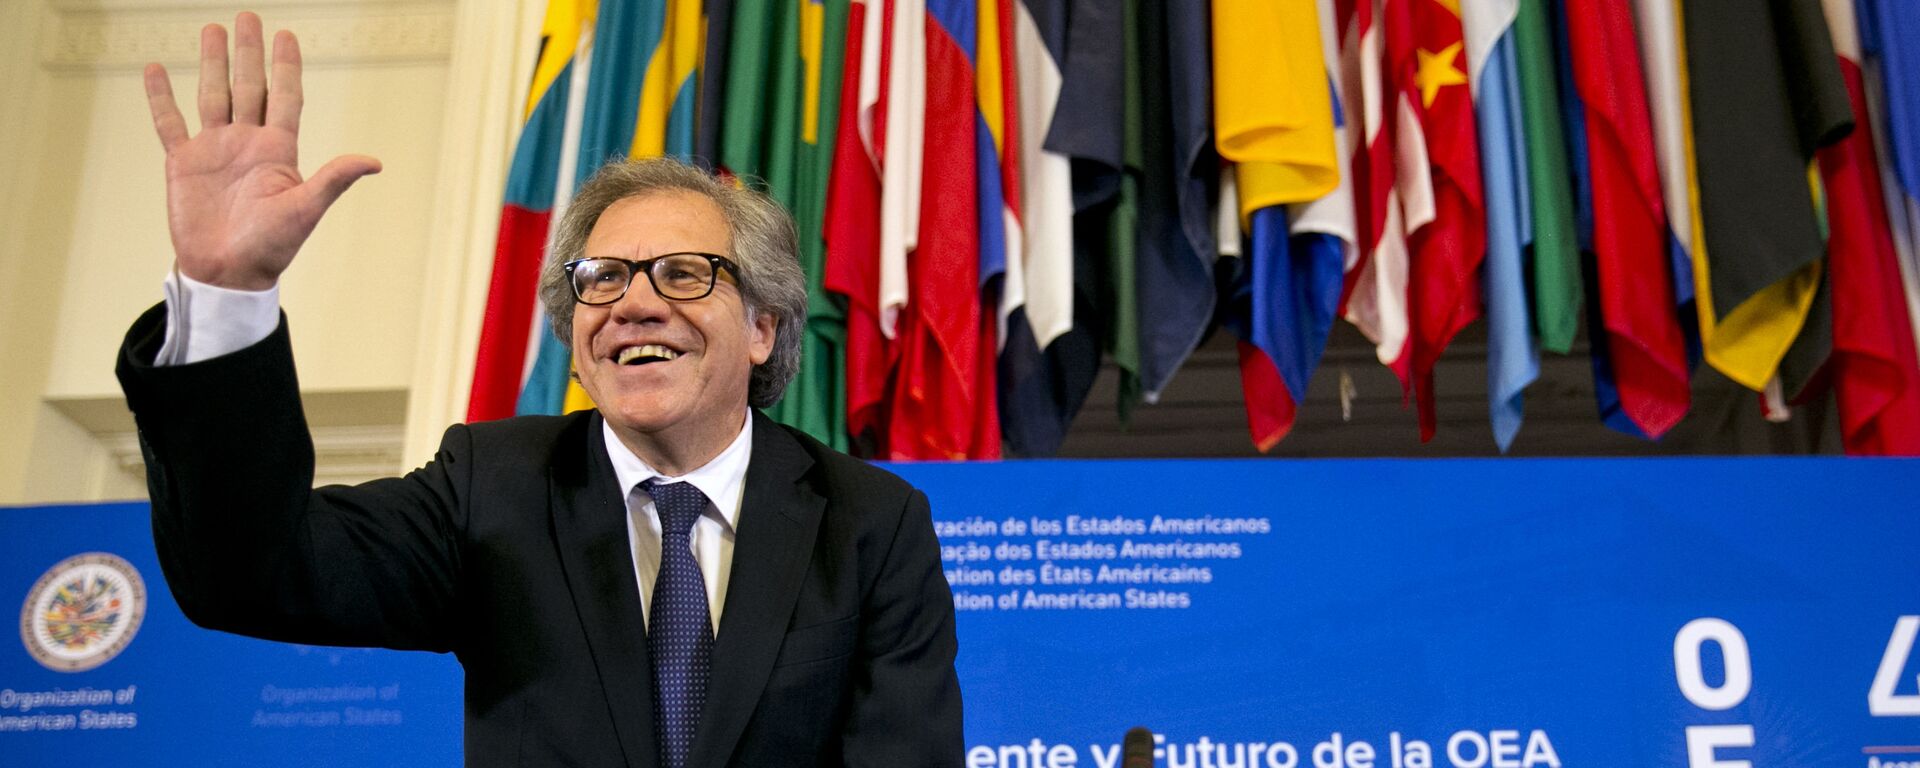 The new Organization of American States (OAS) Secretary General, former Uruguay Foreign Minister Luis Almagro, waves at the start of the general assembly's inaugural session in the Hall of the Americas, Monday June 15, 2015, at the OAS in Washington - Sputnik Mundo, 1920, 05.06.2021